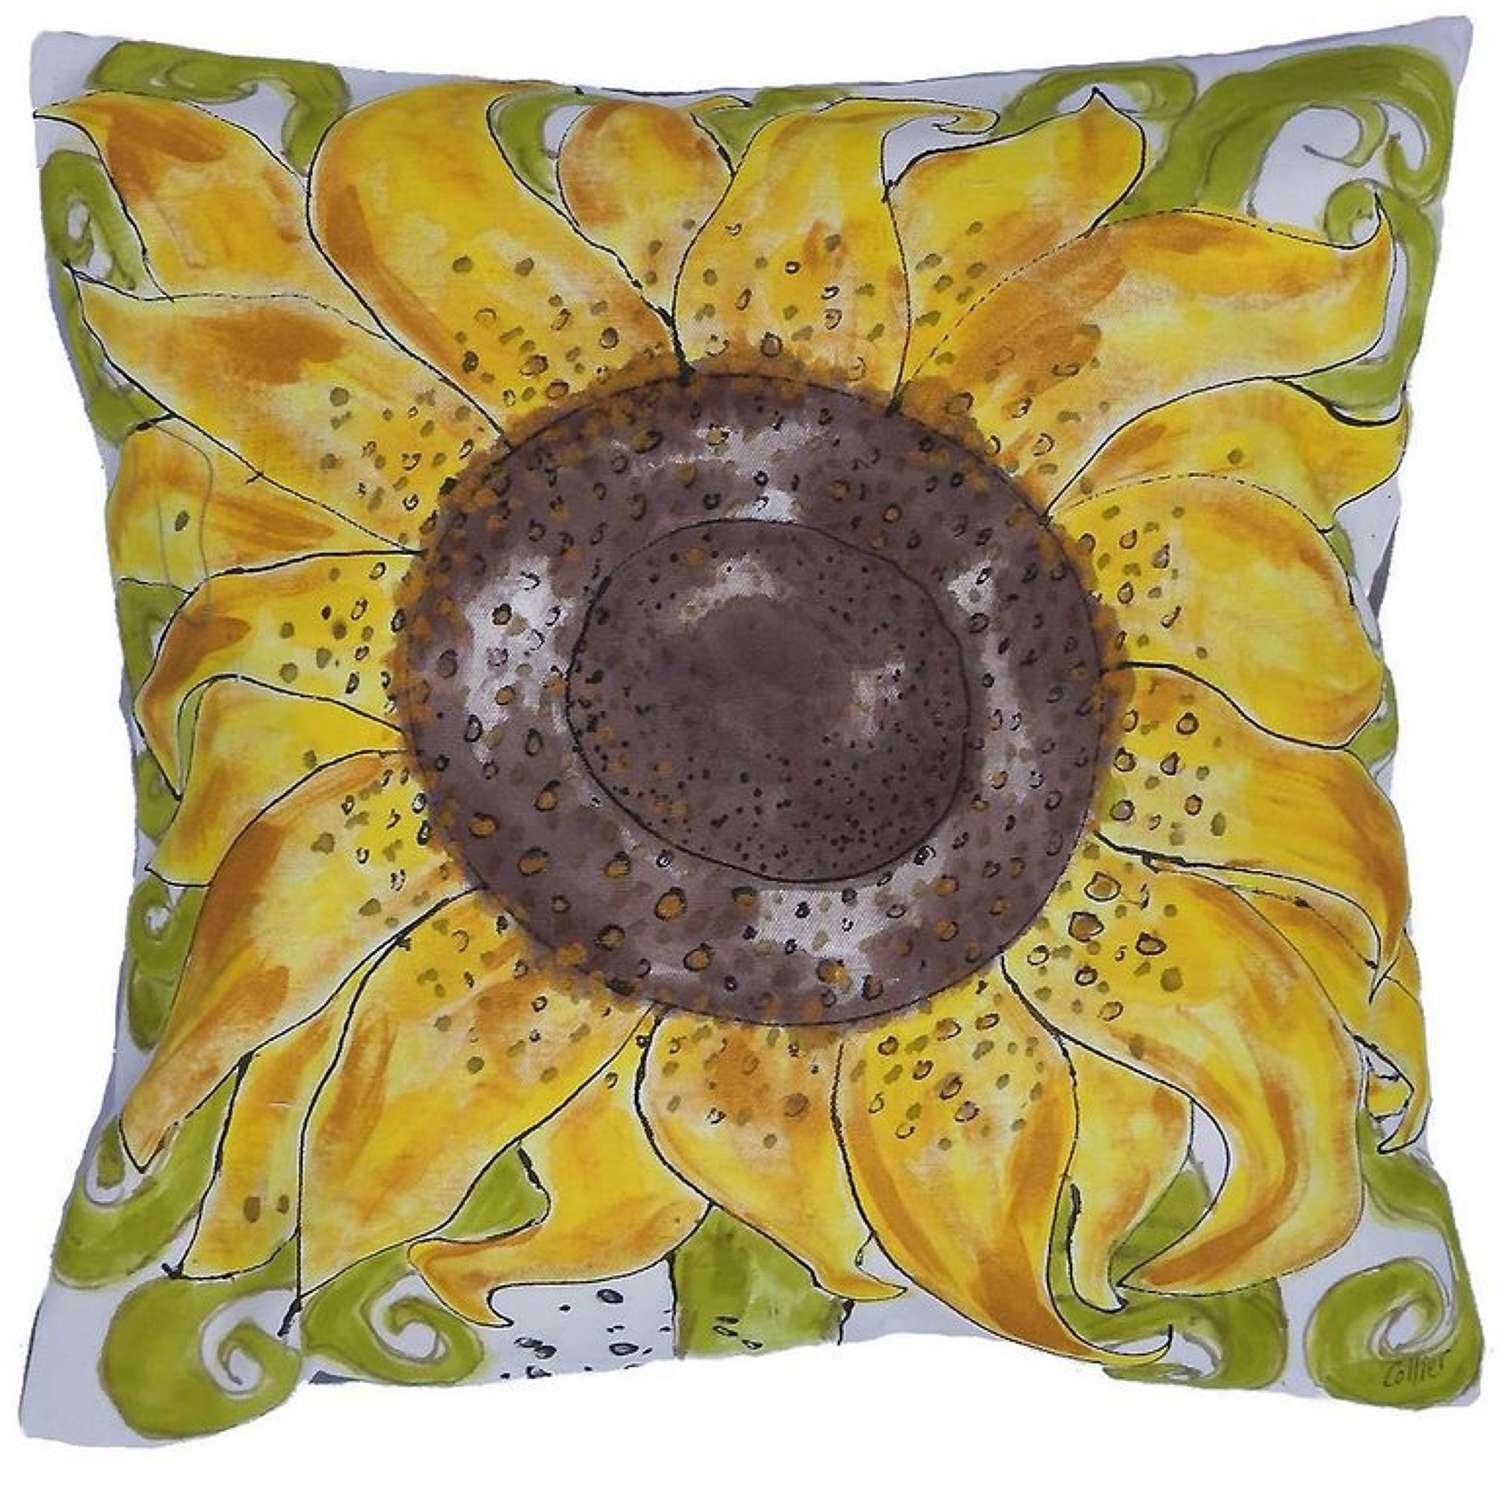 One of a Kind Pillow Hand-Painted Sunflower Unique Throw Cushion Artist Signed